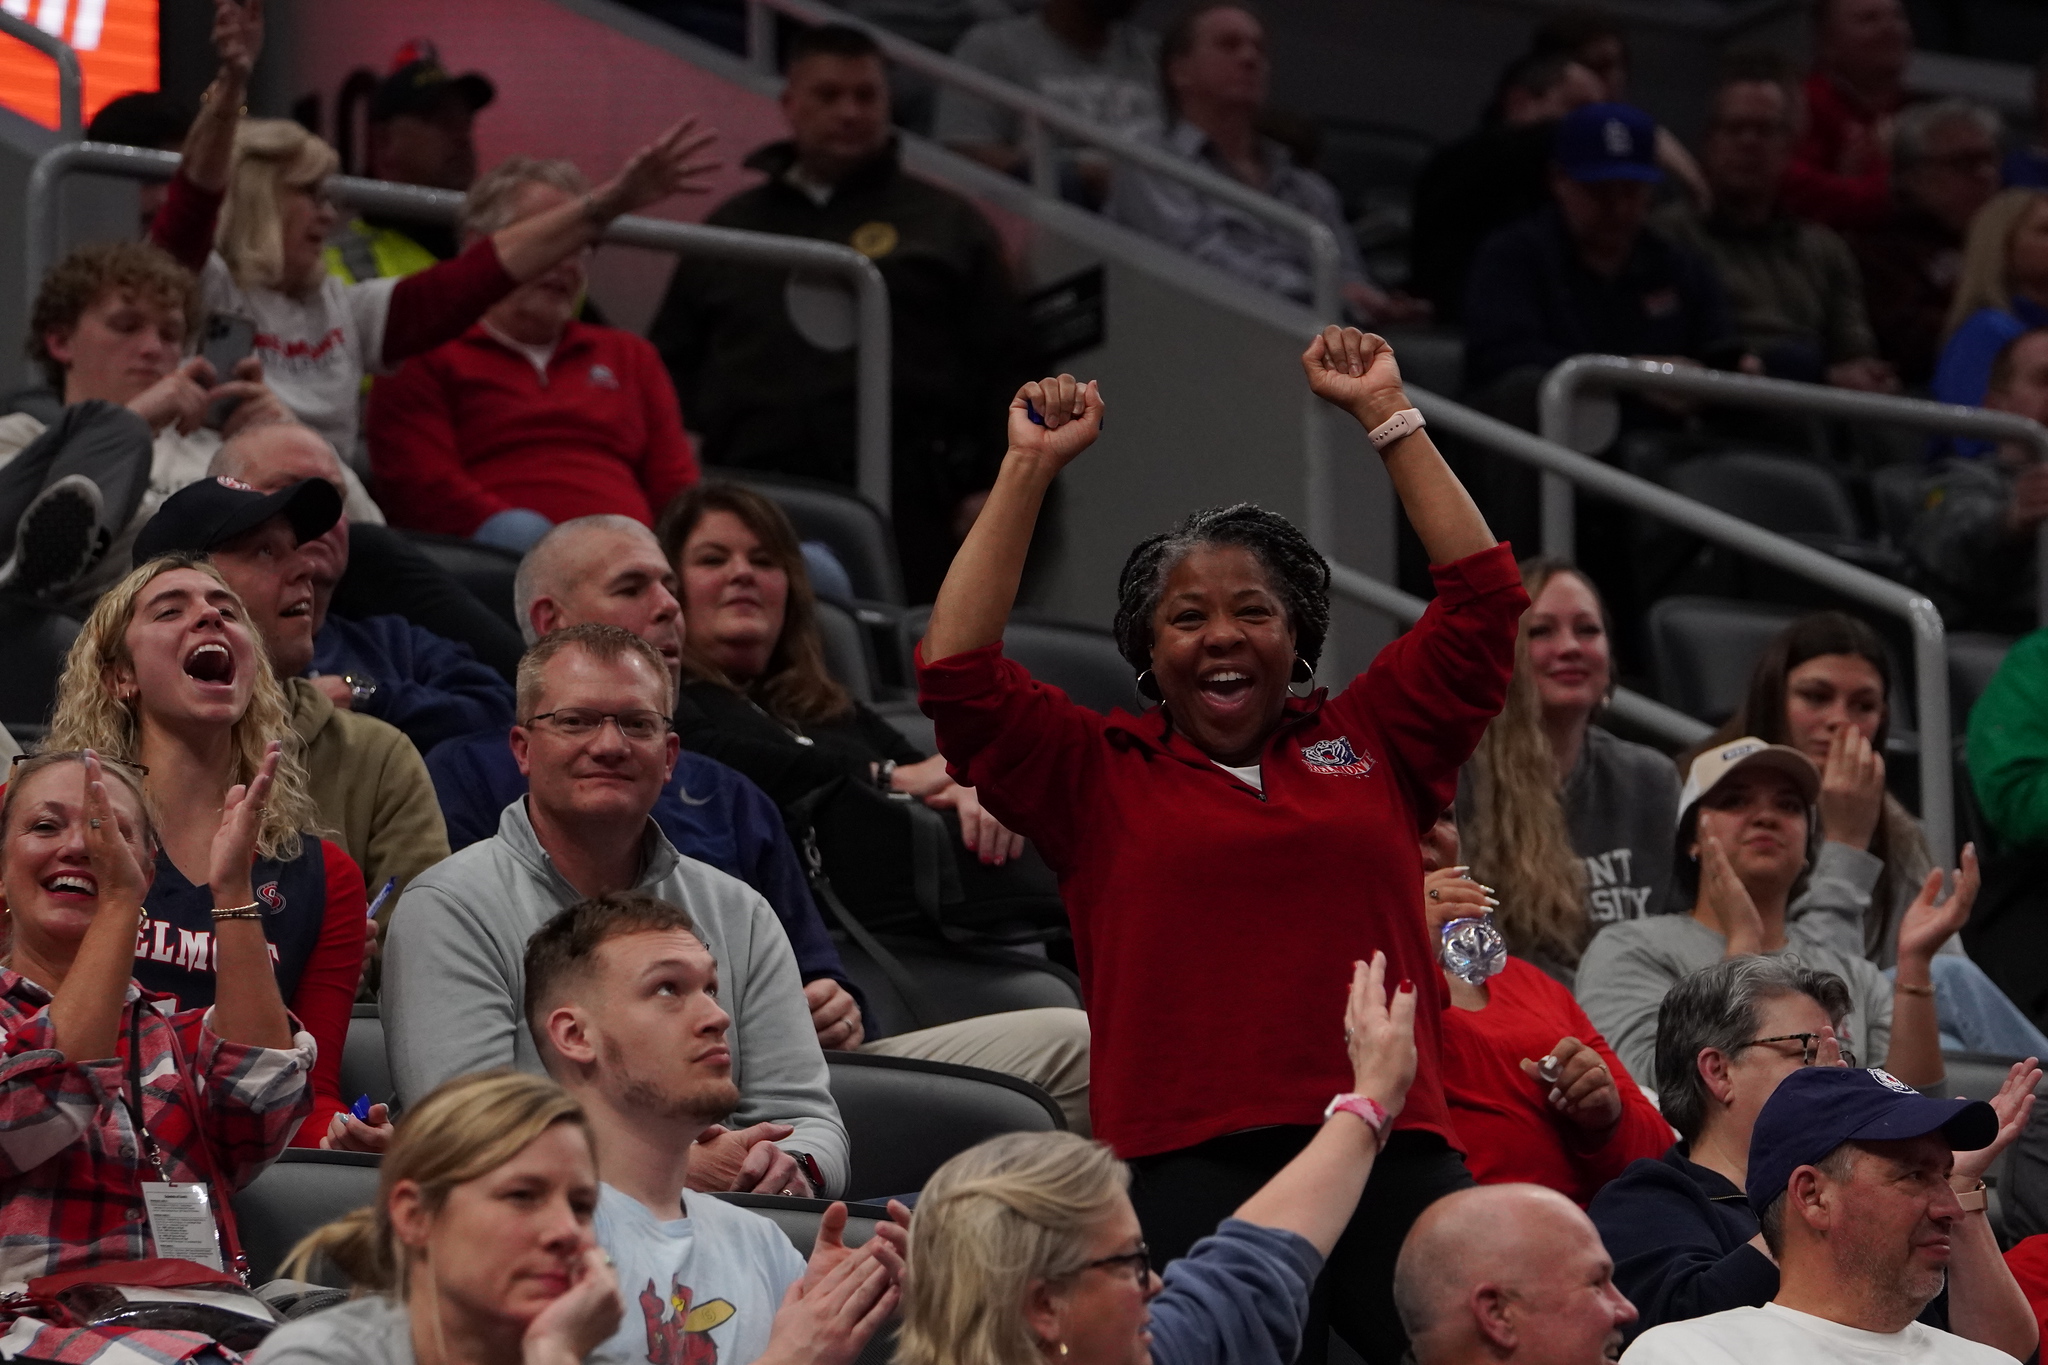 A woman cheers in the stands at a Belmont basketball game.